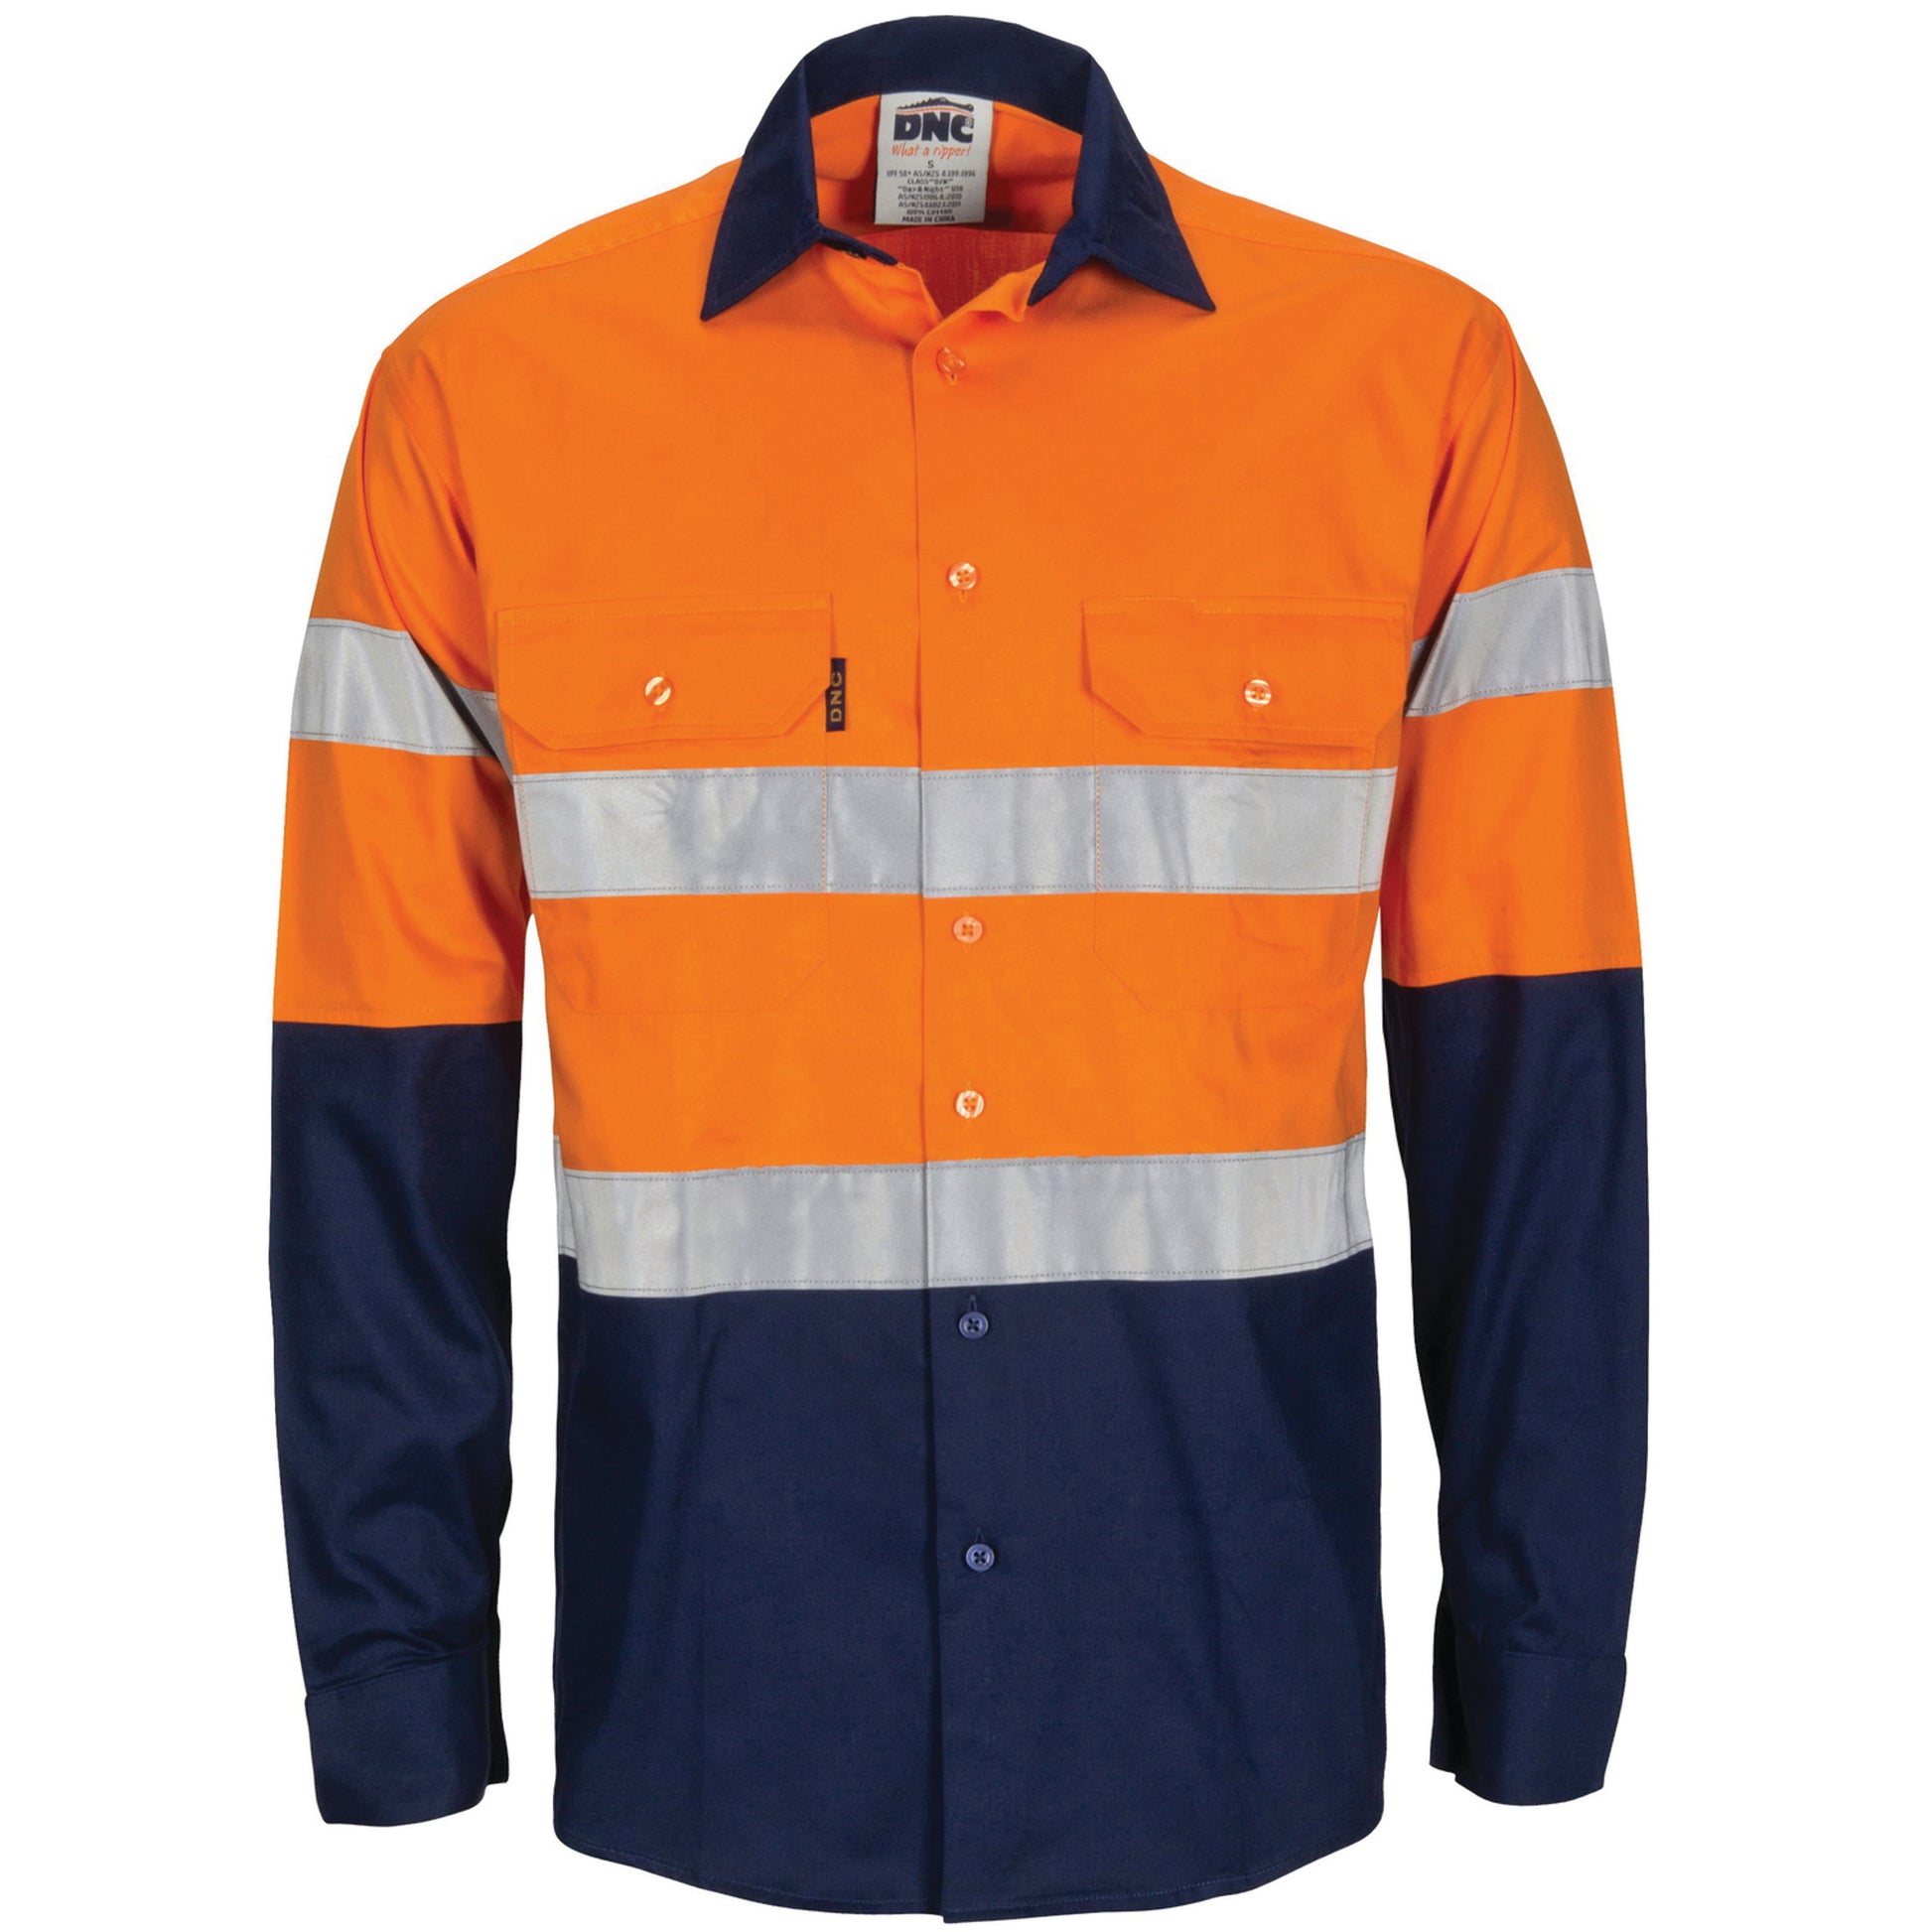 DNC HiVis R/W Cool-Breeze T2 Vertical Vented Cotton Shirt with Gusset Sleeves, Generic R/Tape - Long Sle 3782 - Star Uniforms Australia